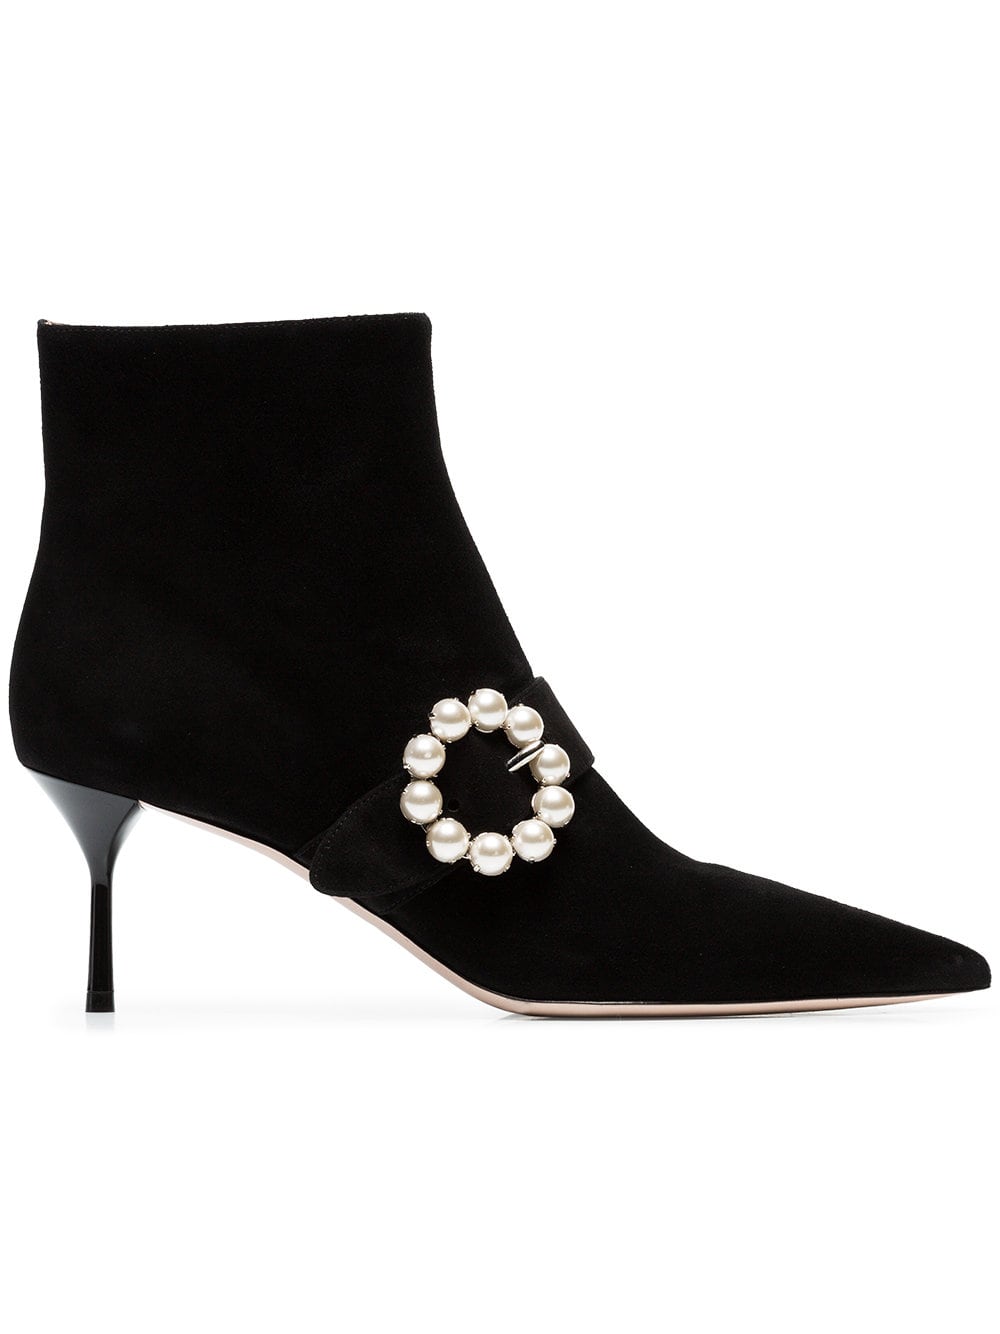 MIU MIU - Side Pearl 65 Suede Leather Boots - Black | ABOUT ICONS